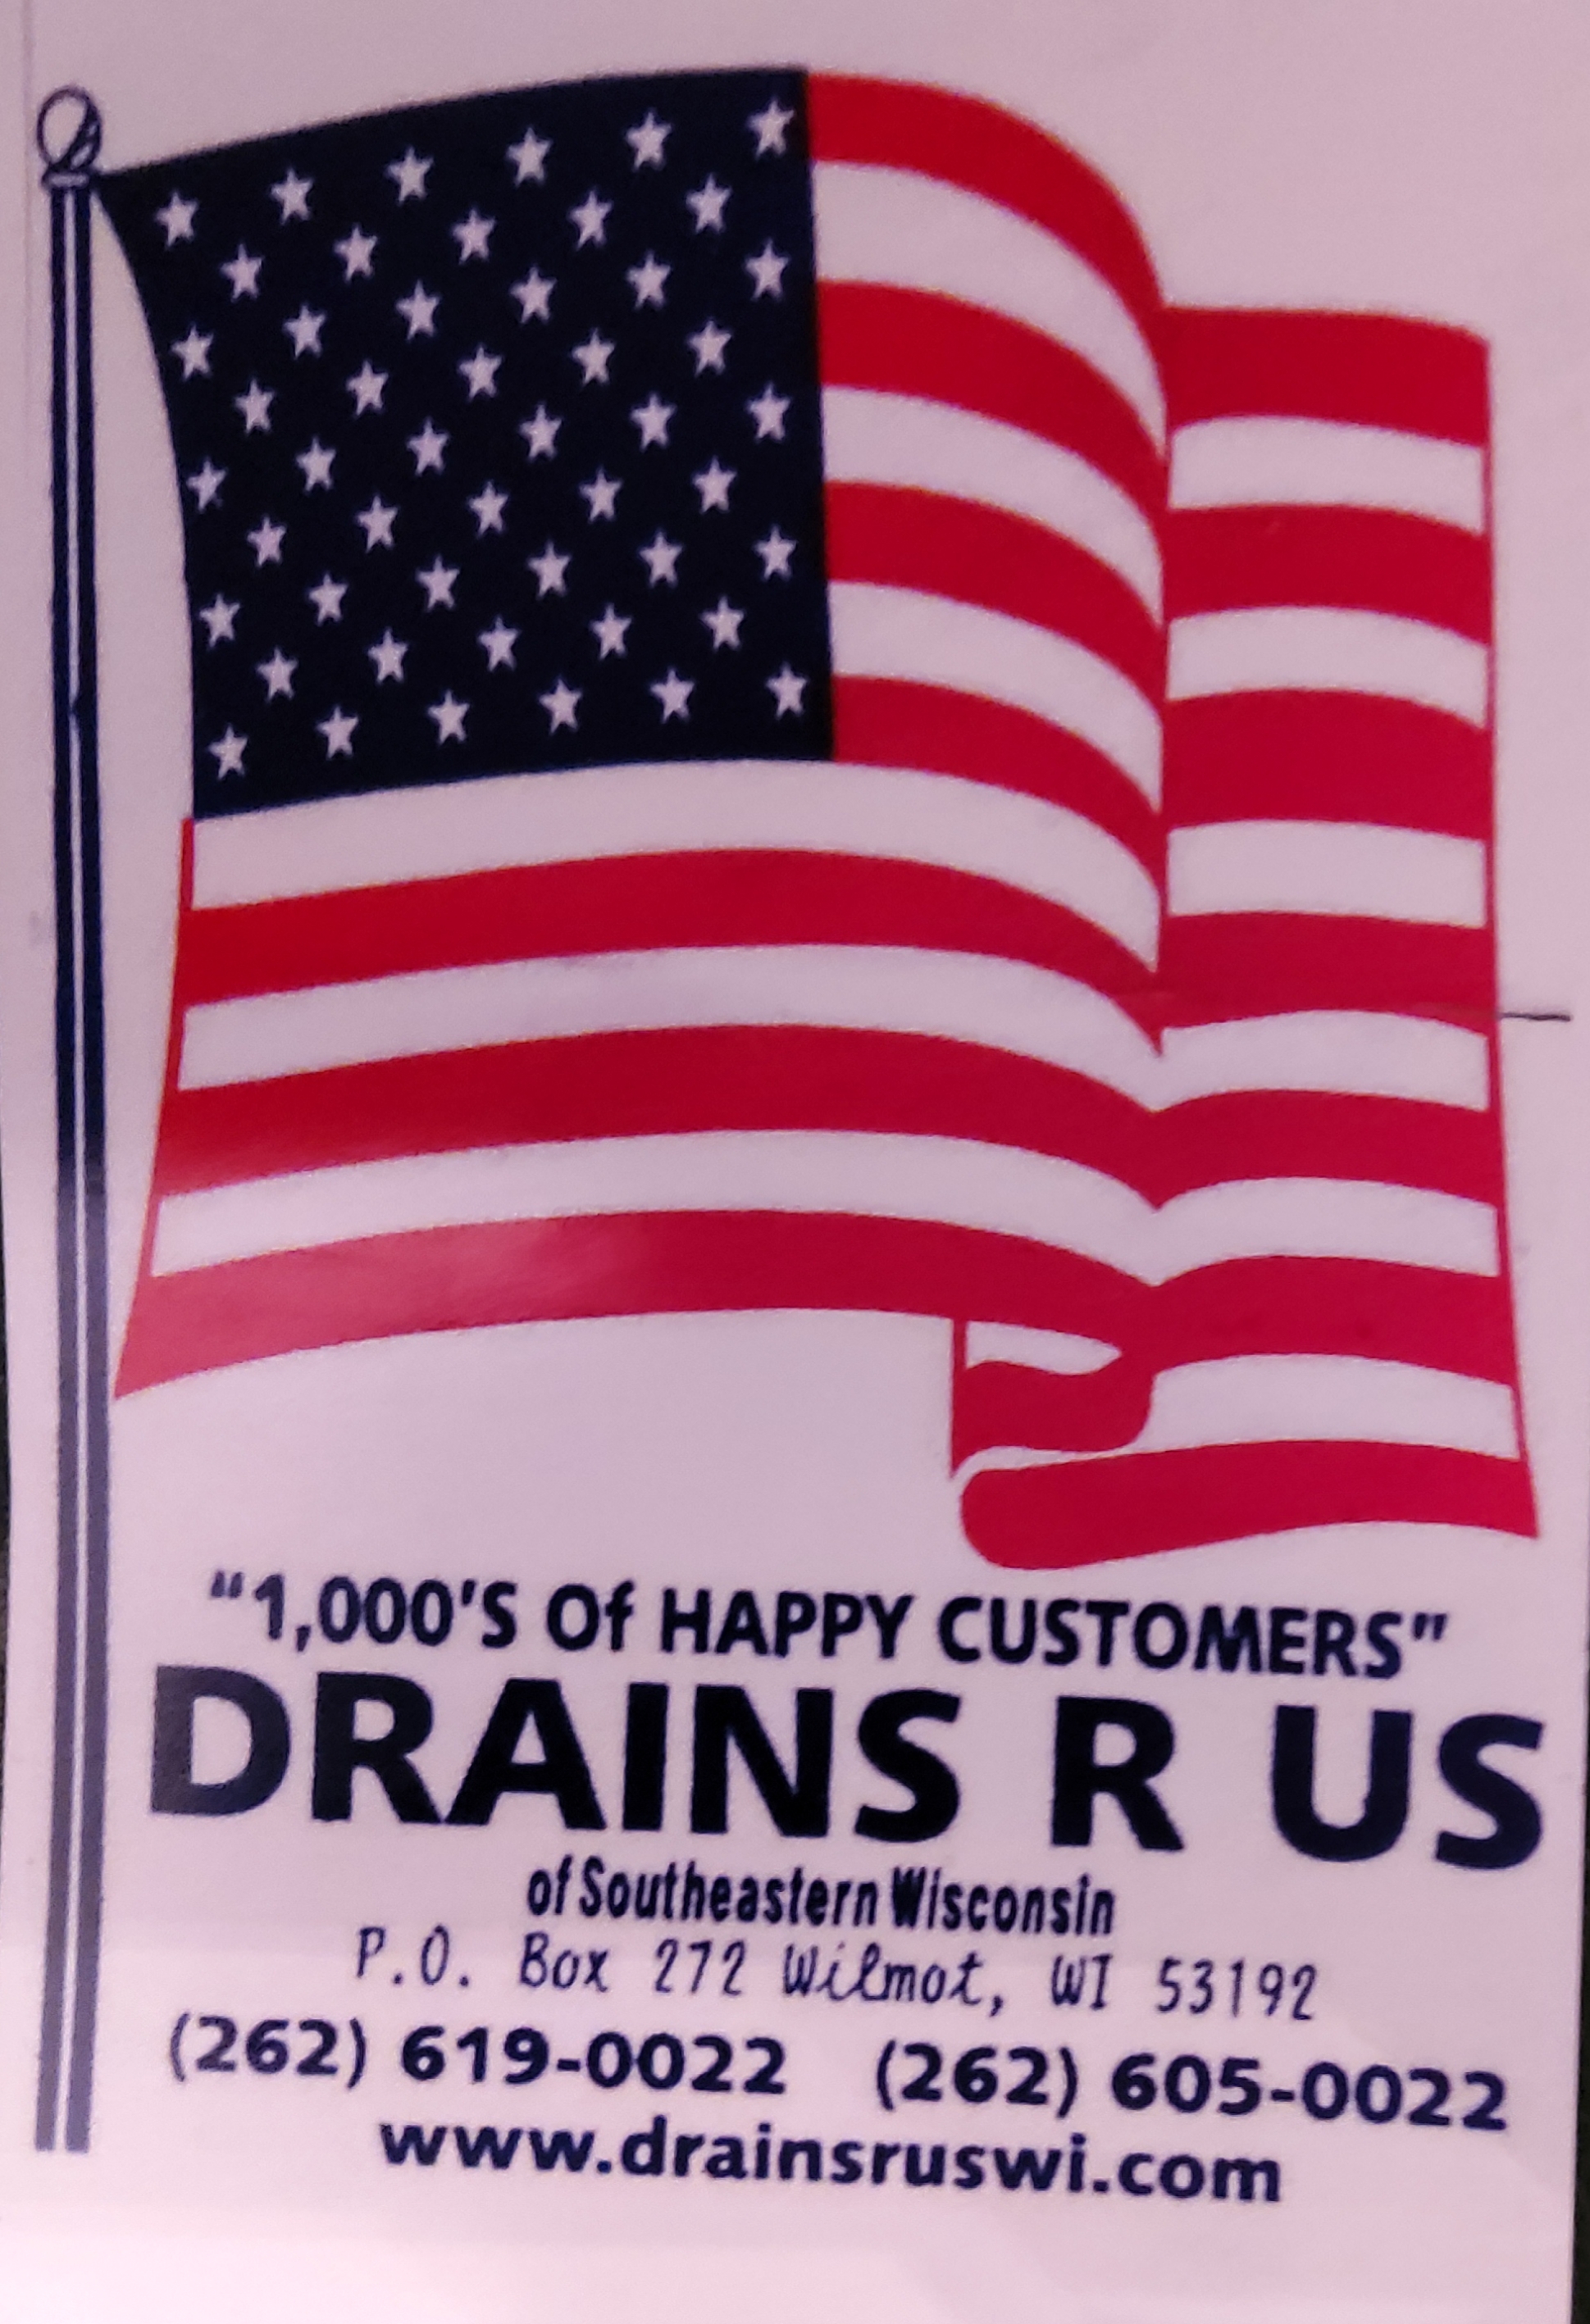 Drains R Us of Southeastern Wisconsin Logo